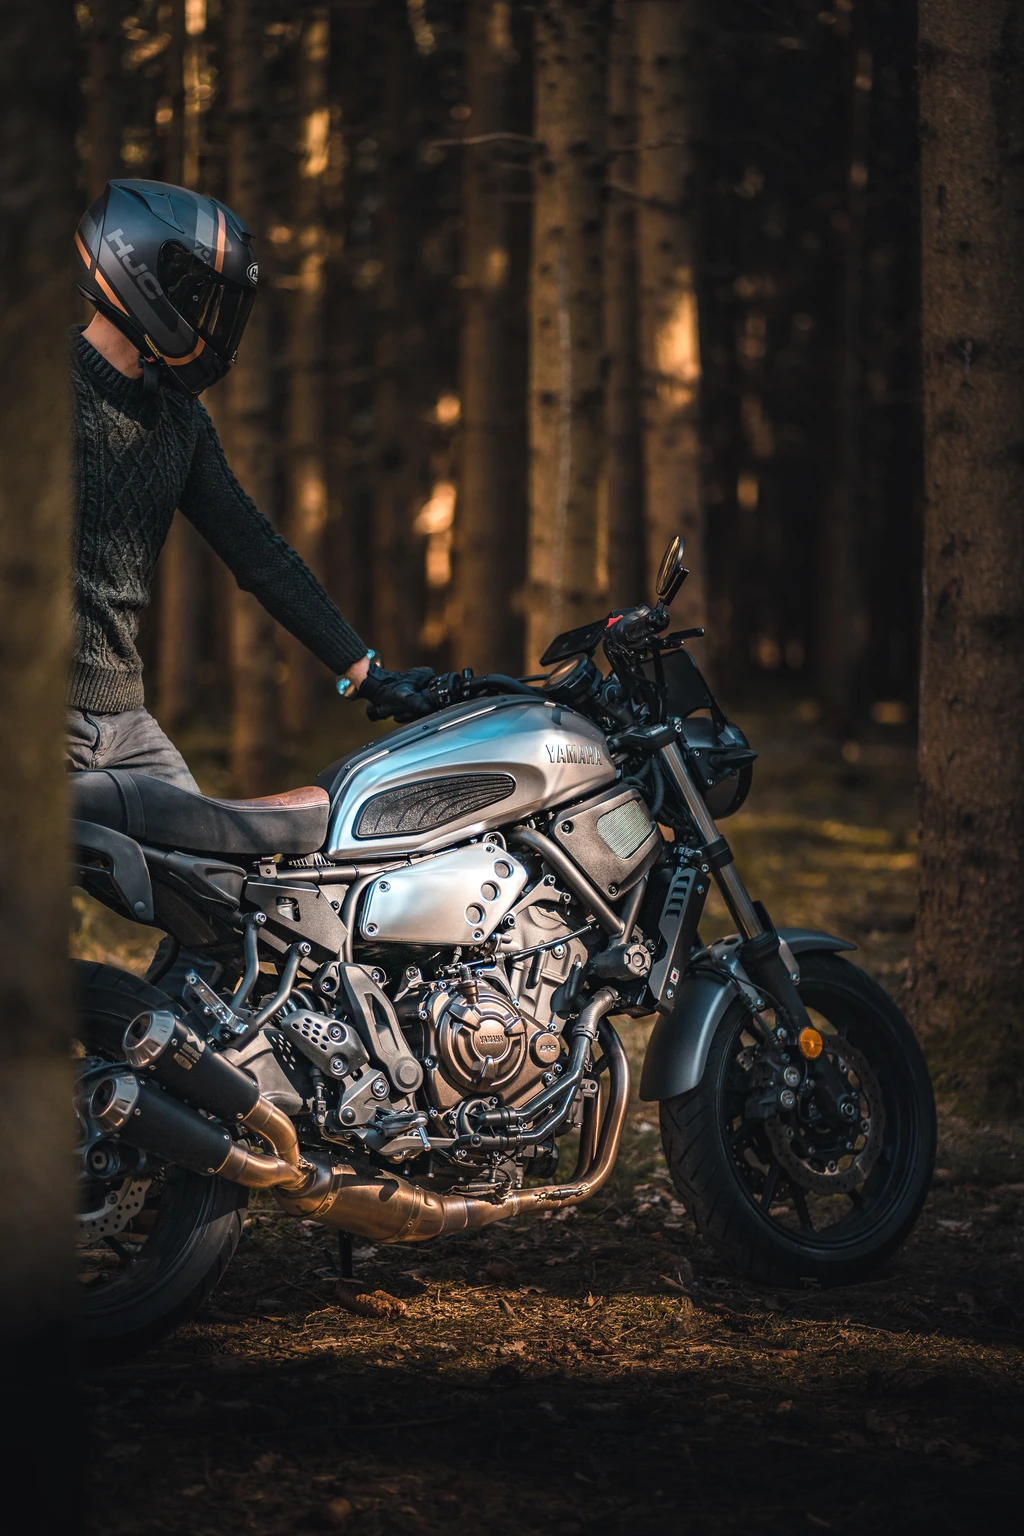 Exploring the woods with a Neo Scrambler Motorbike